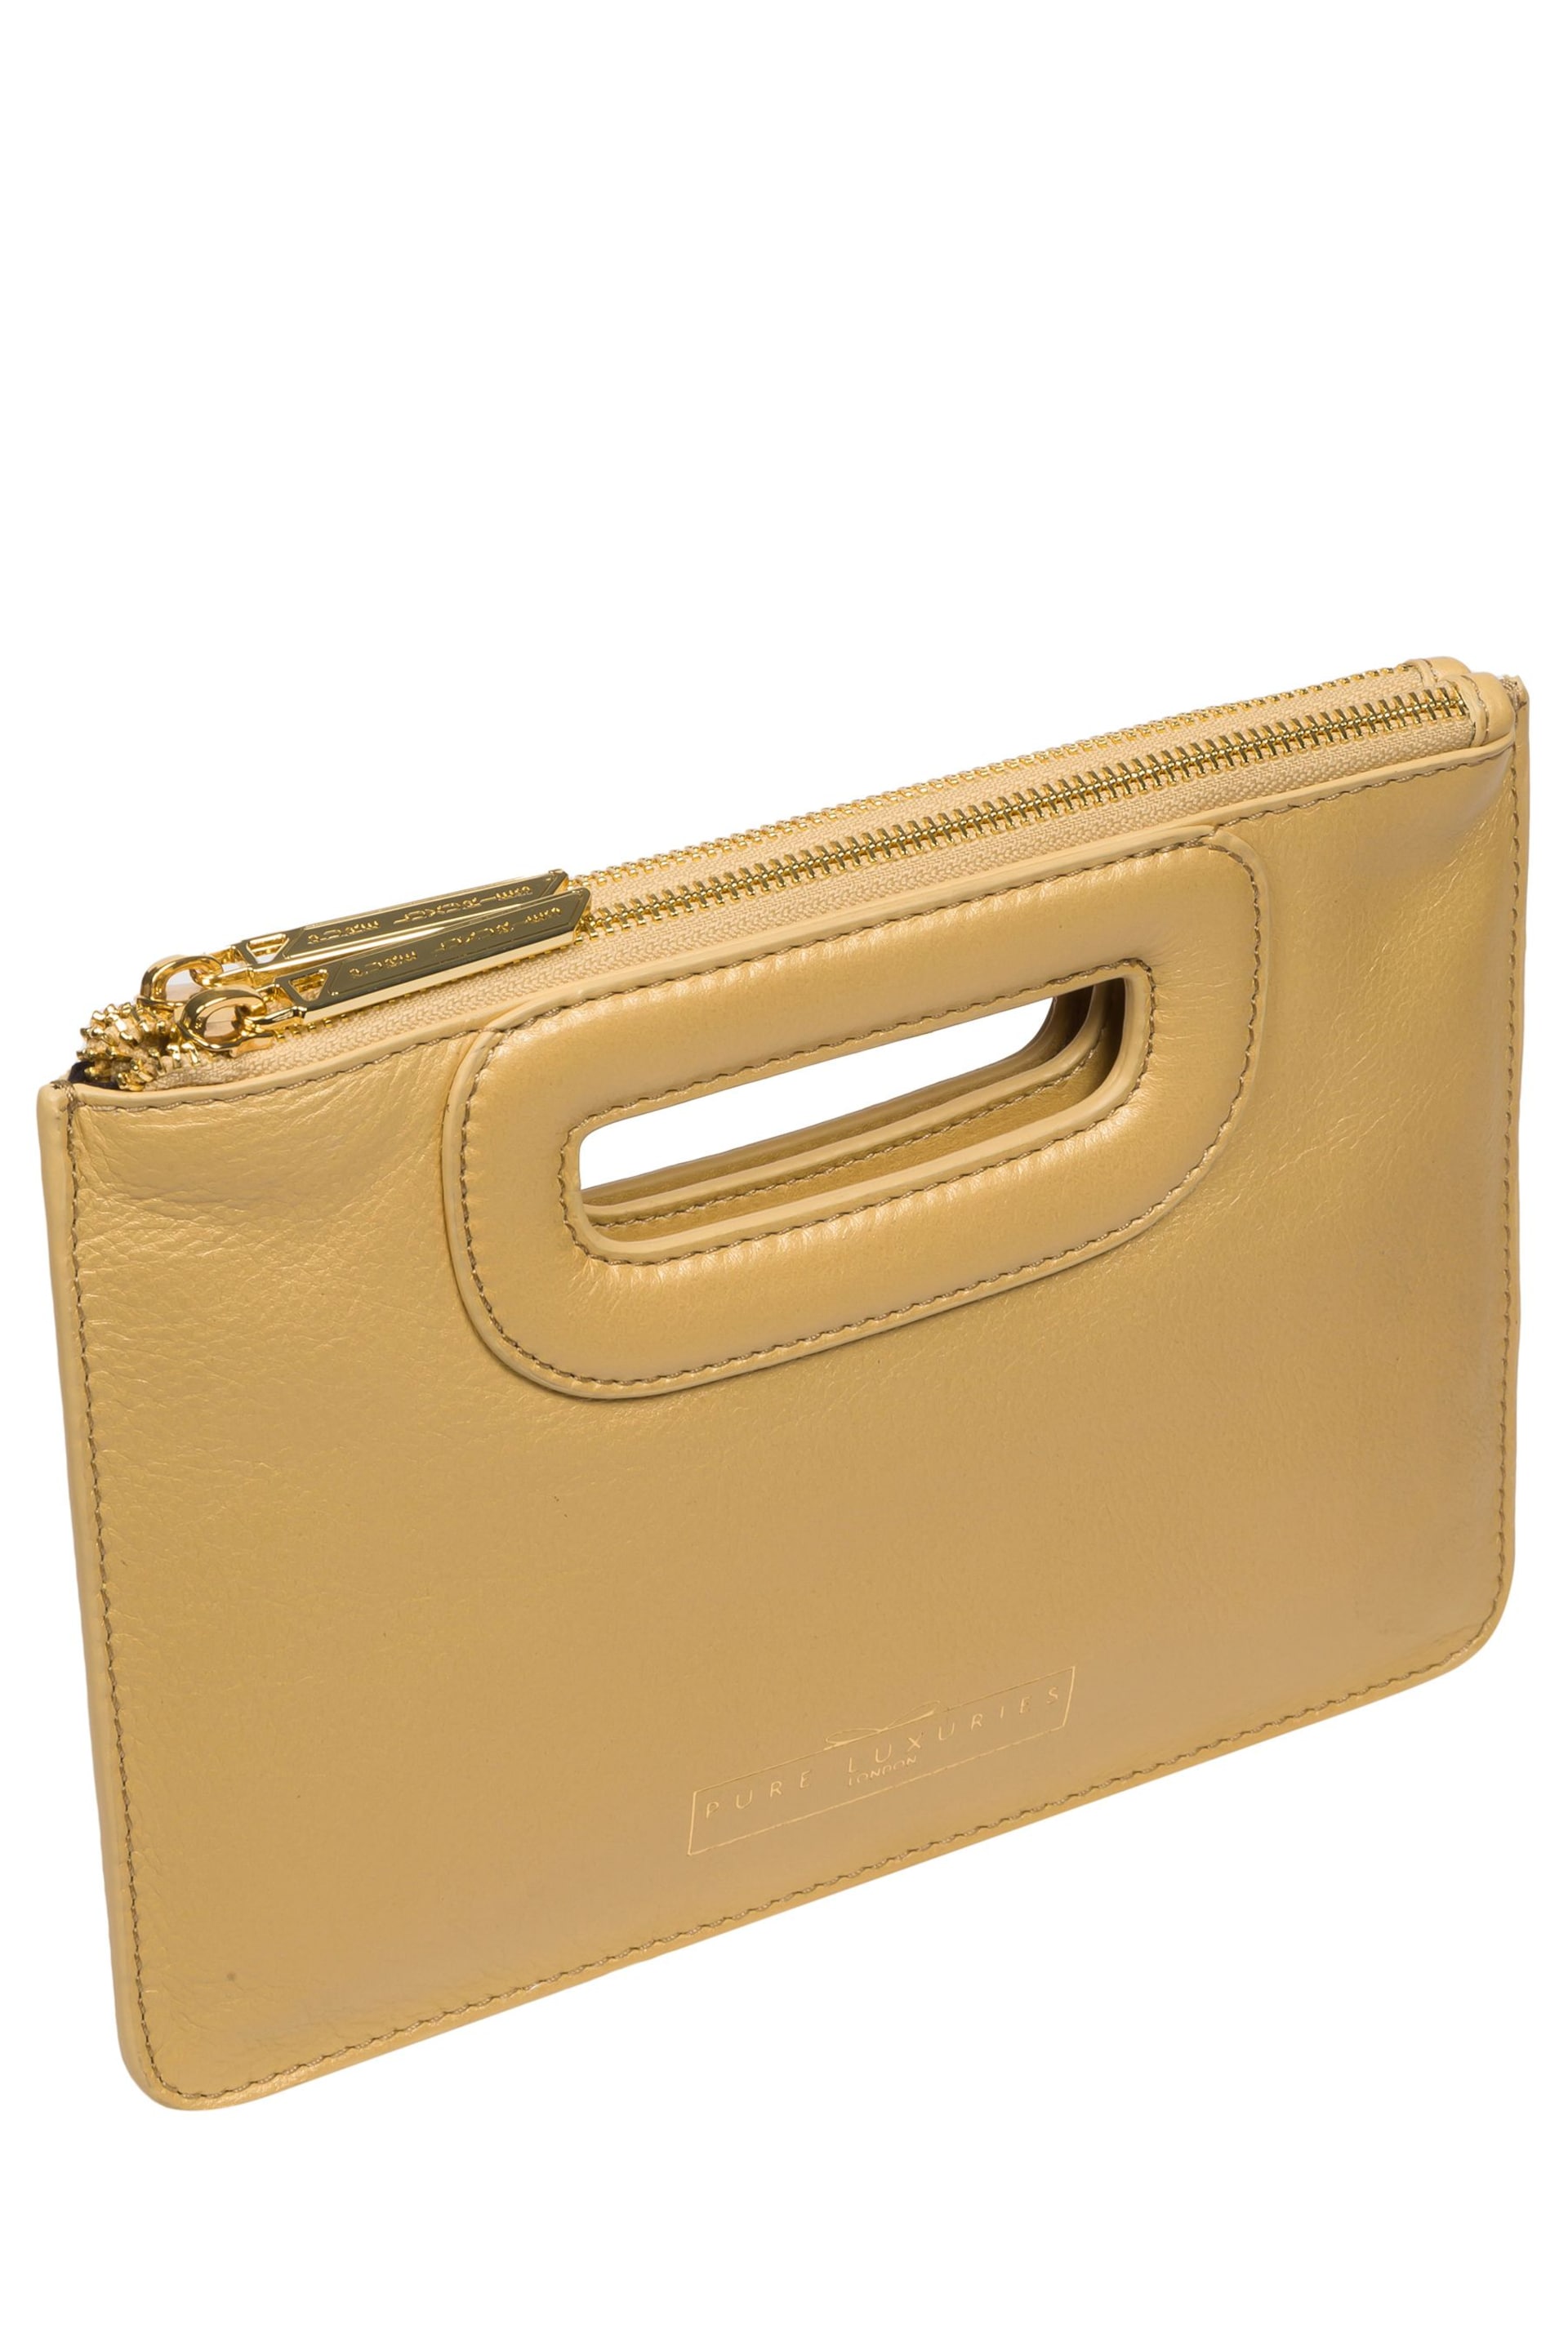 Pure Luxuries London Esher Leather Clutch Bag - Image 4 of 6